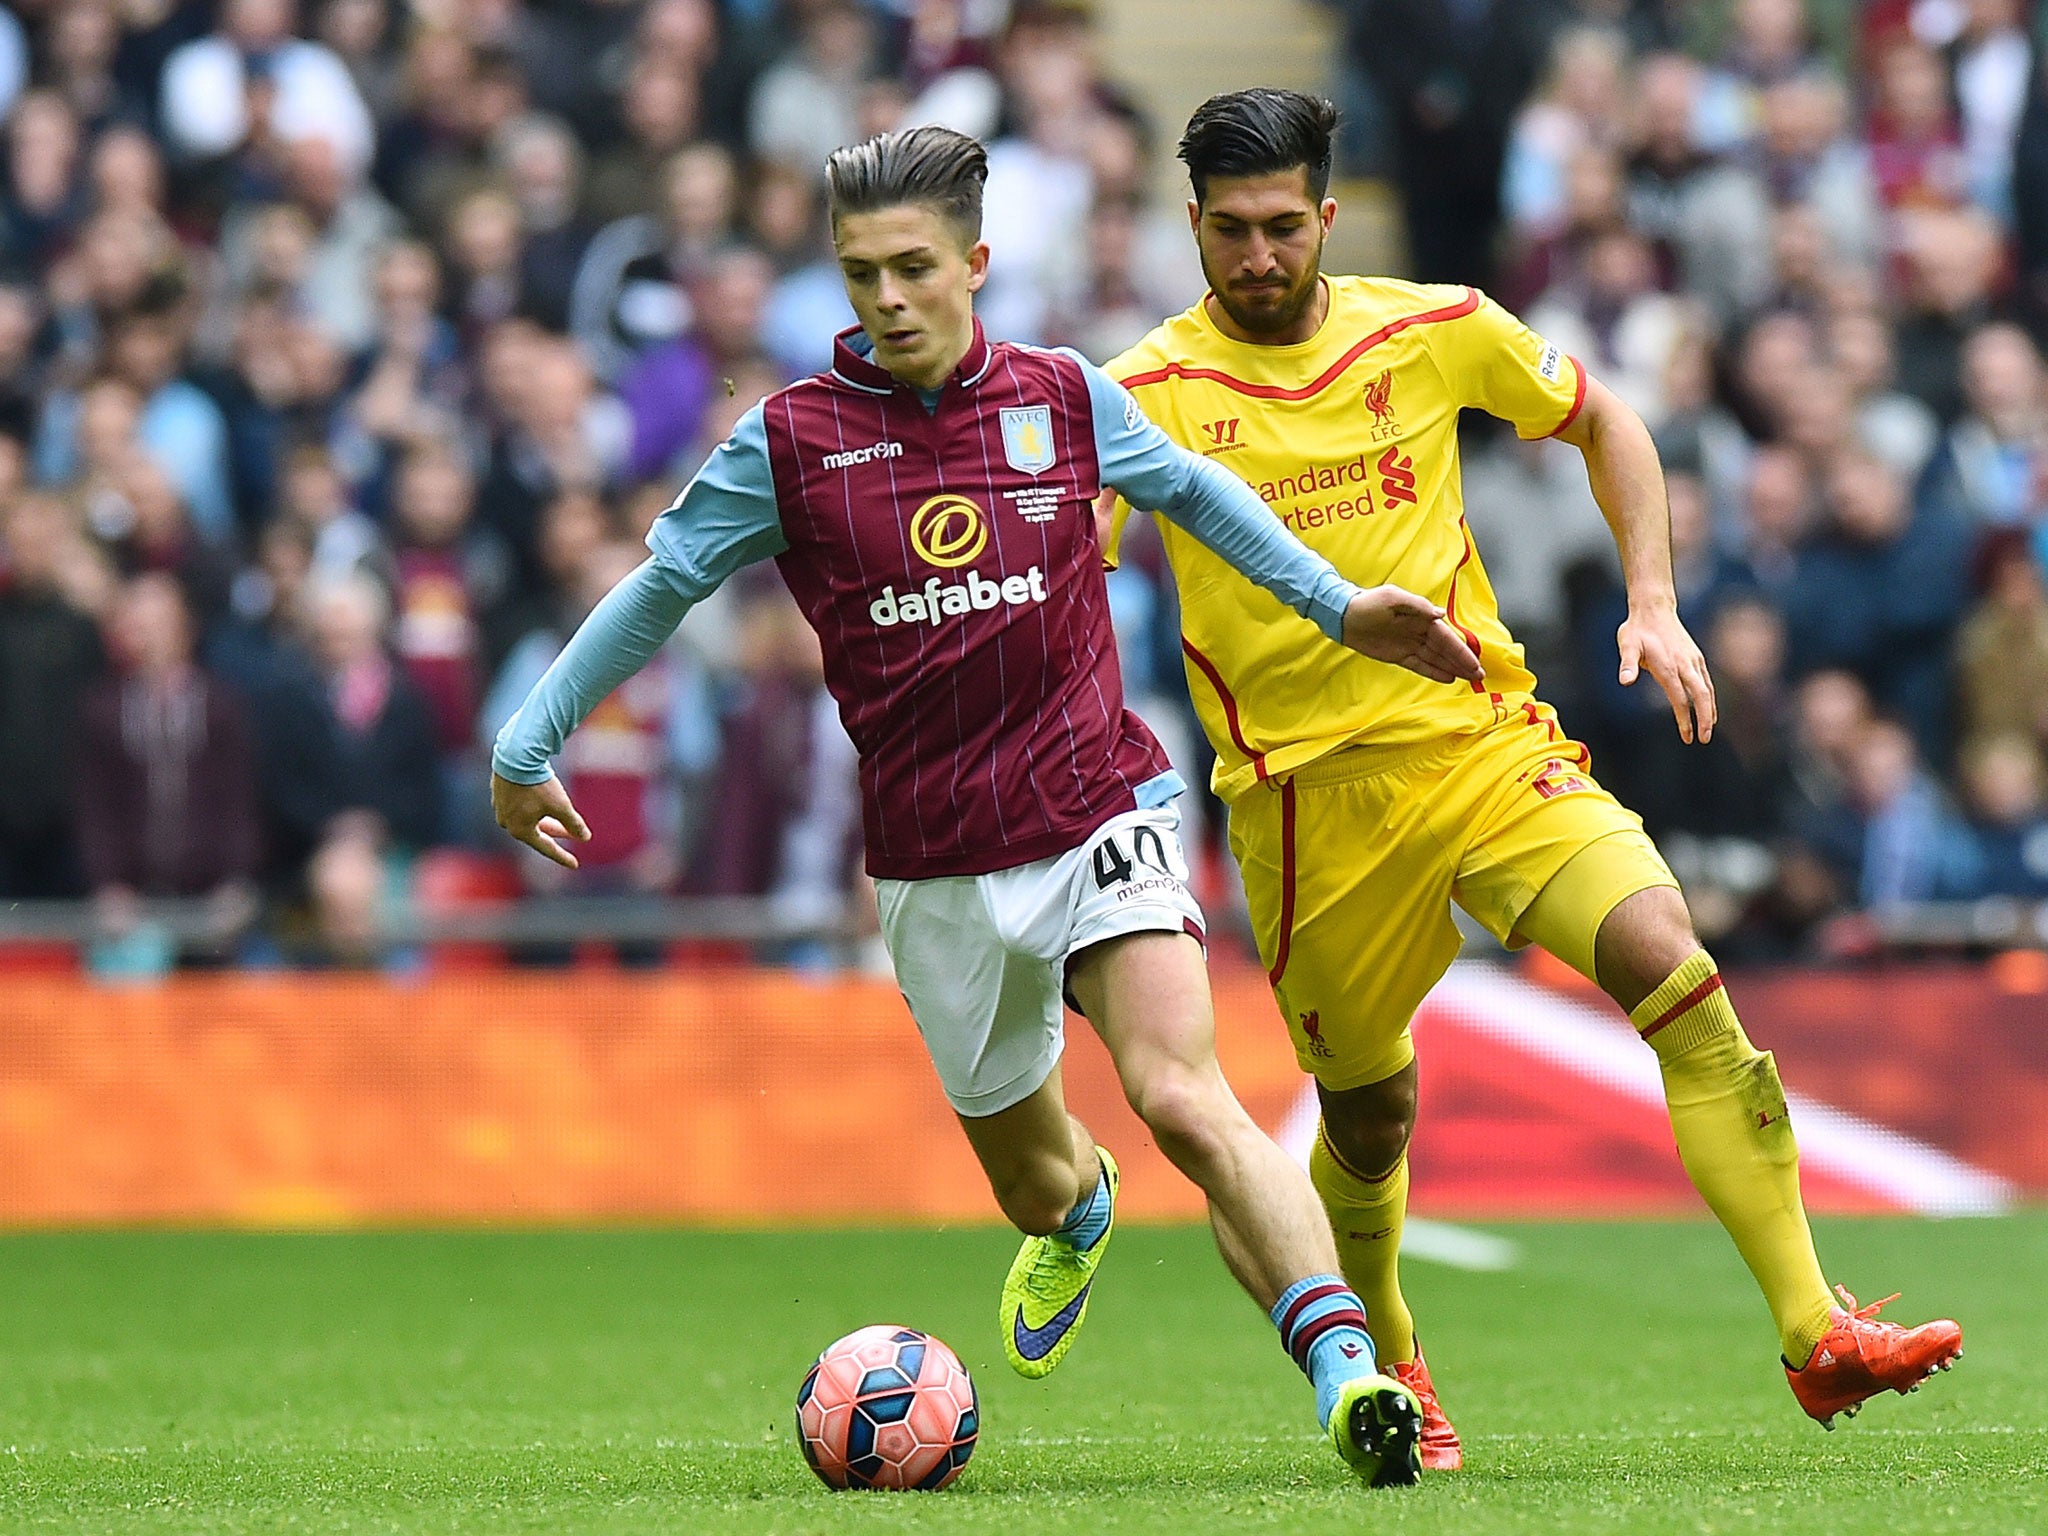 Jack Grealish in action for Aston Villa